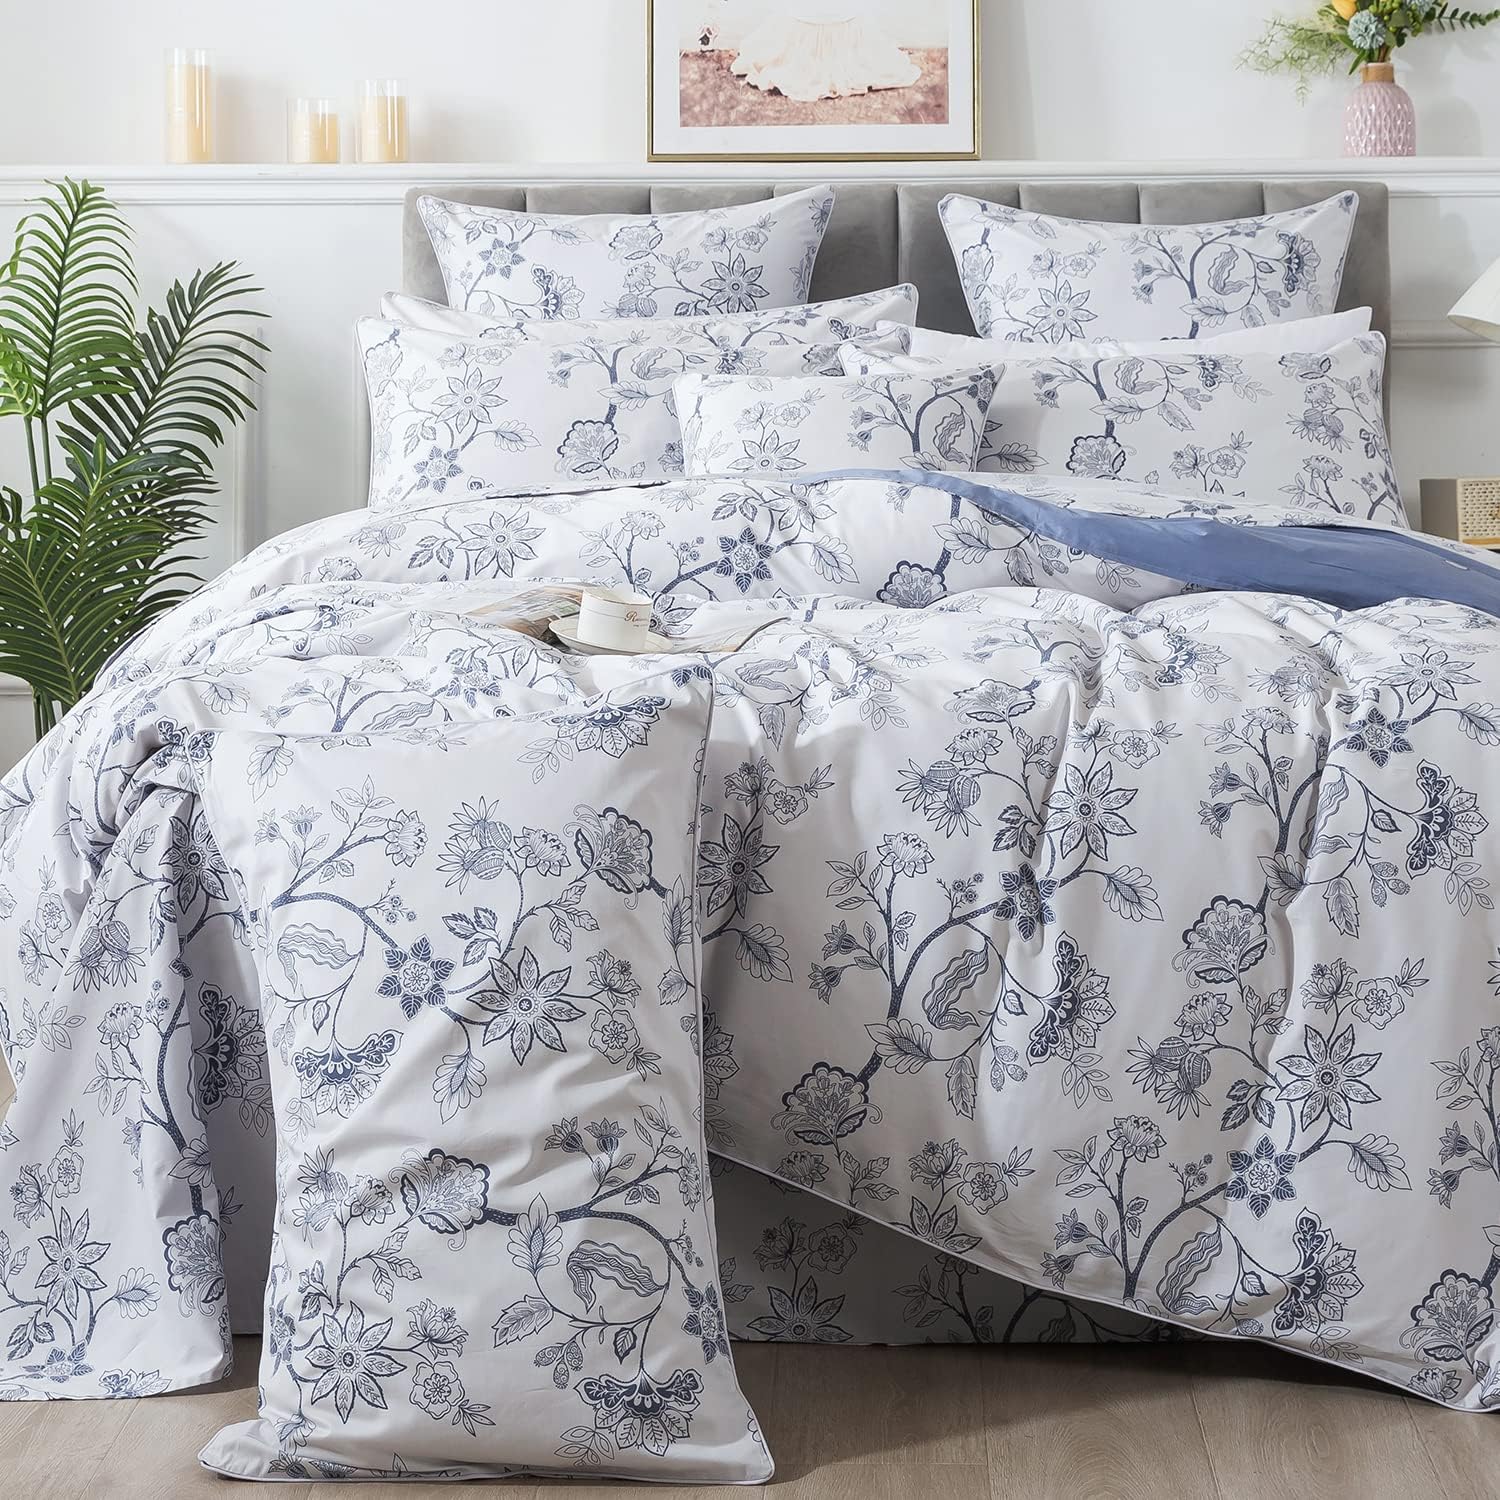 FADFAY Duvet Cover Set Queen Floral Bedding Percale Cotton 600 TC Classical Toile Luxury Reversible Light Blue Shabby Vintage Farmhouse Bedding Minimalist Chic Comforter Cover Soft Breathable 3Pcs